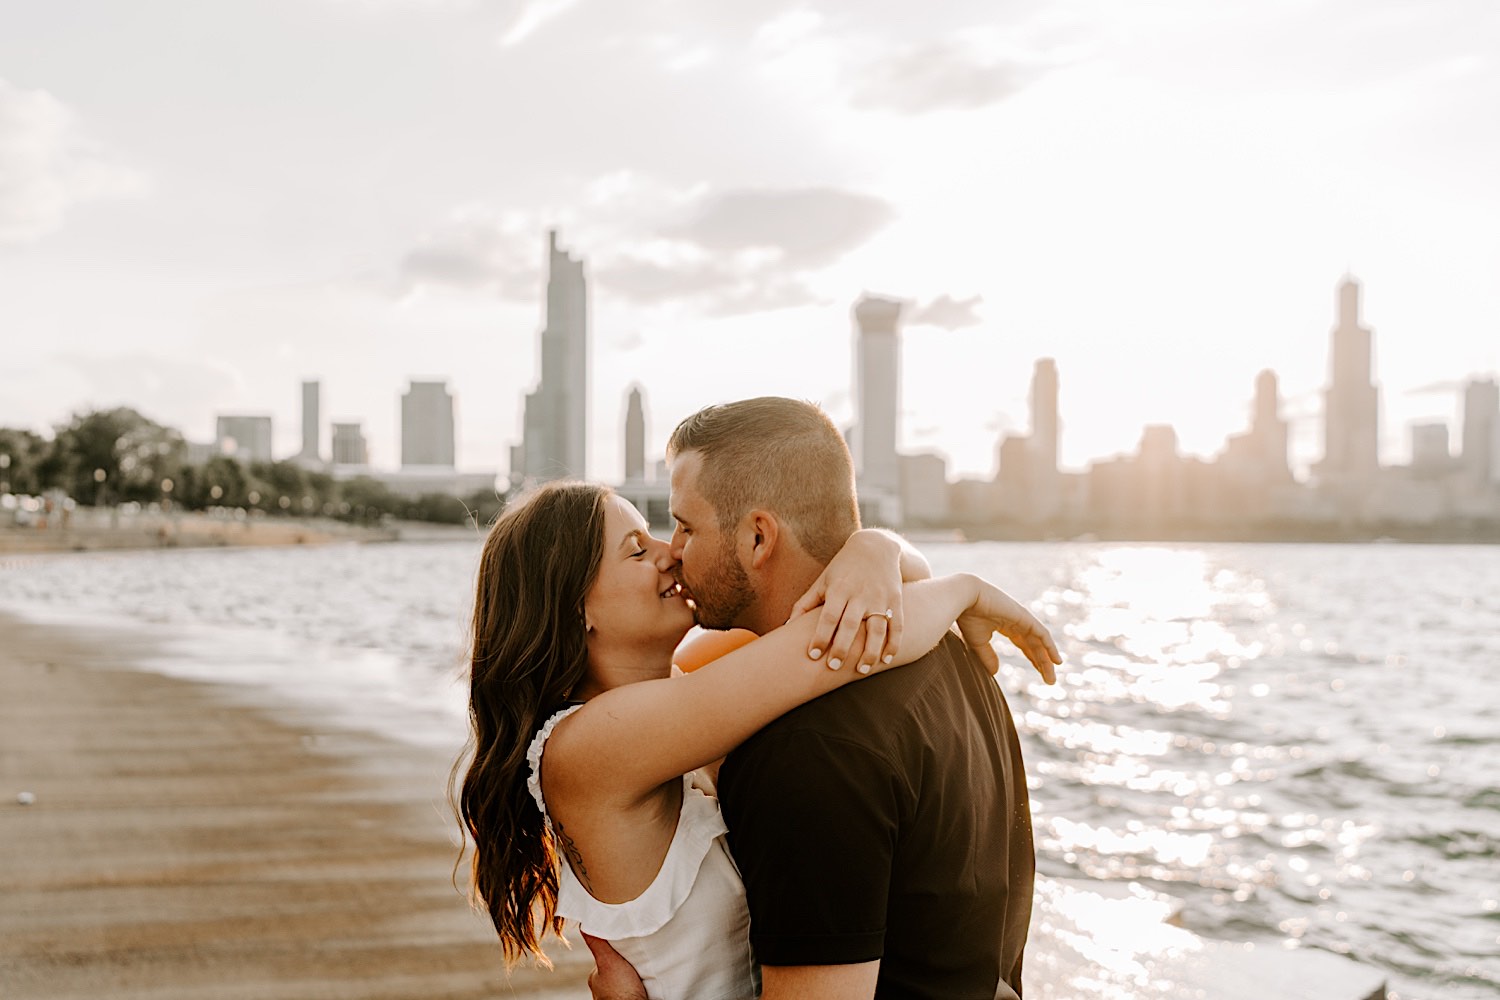 A couple embrace and kiss one another during their engagement session at Chicago's Museum Campus as the sun sets behind them over the Chicago skyline and Lake Michigan